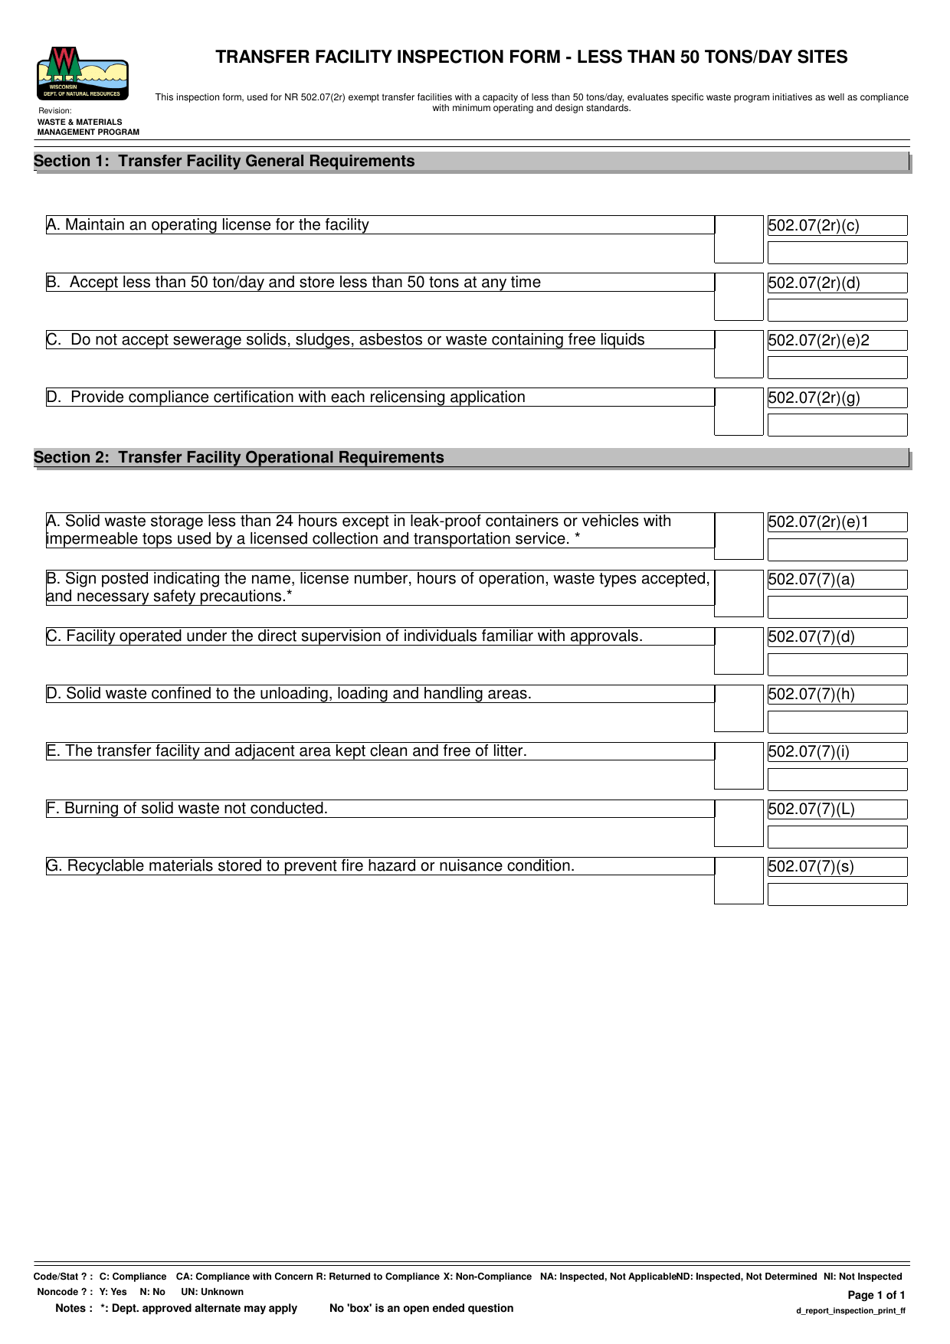 Transfer Facility Inspection Form - Less Than 50 Tons / Day Sites - Wisconsin, Page 1